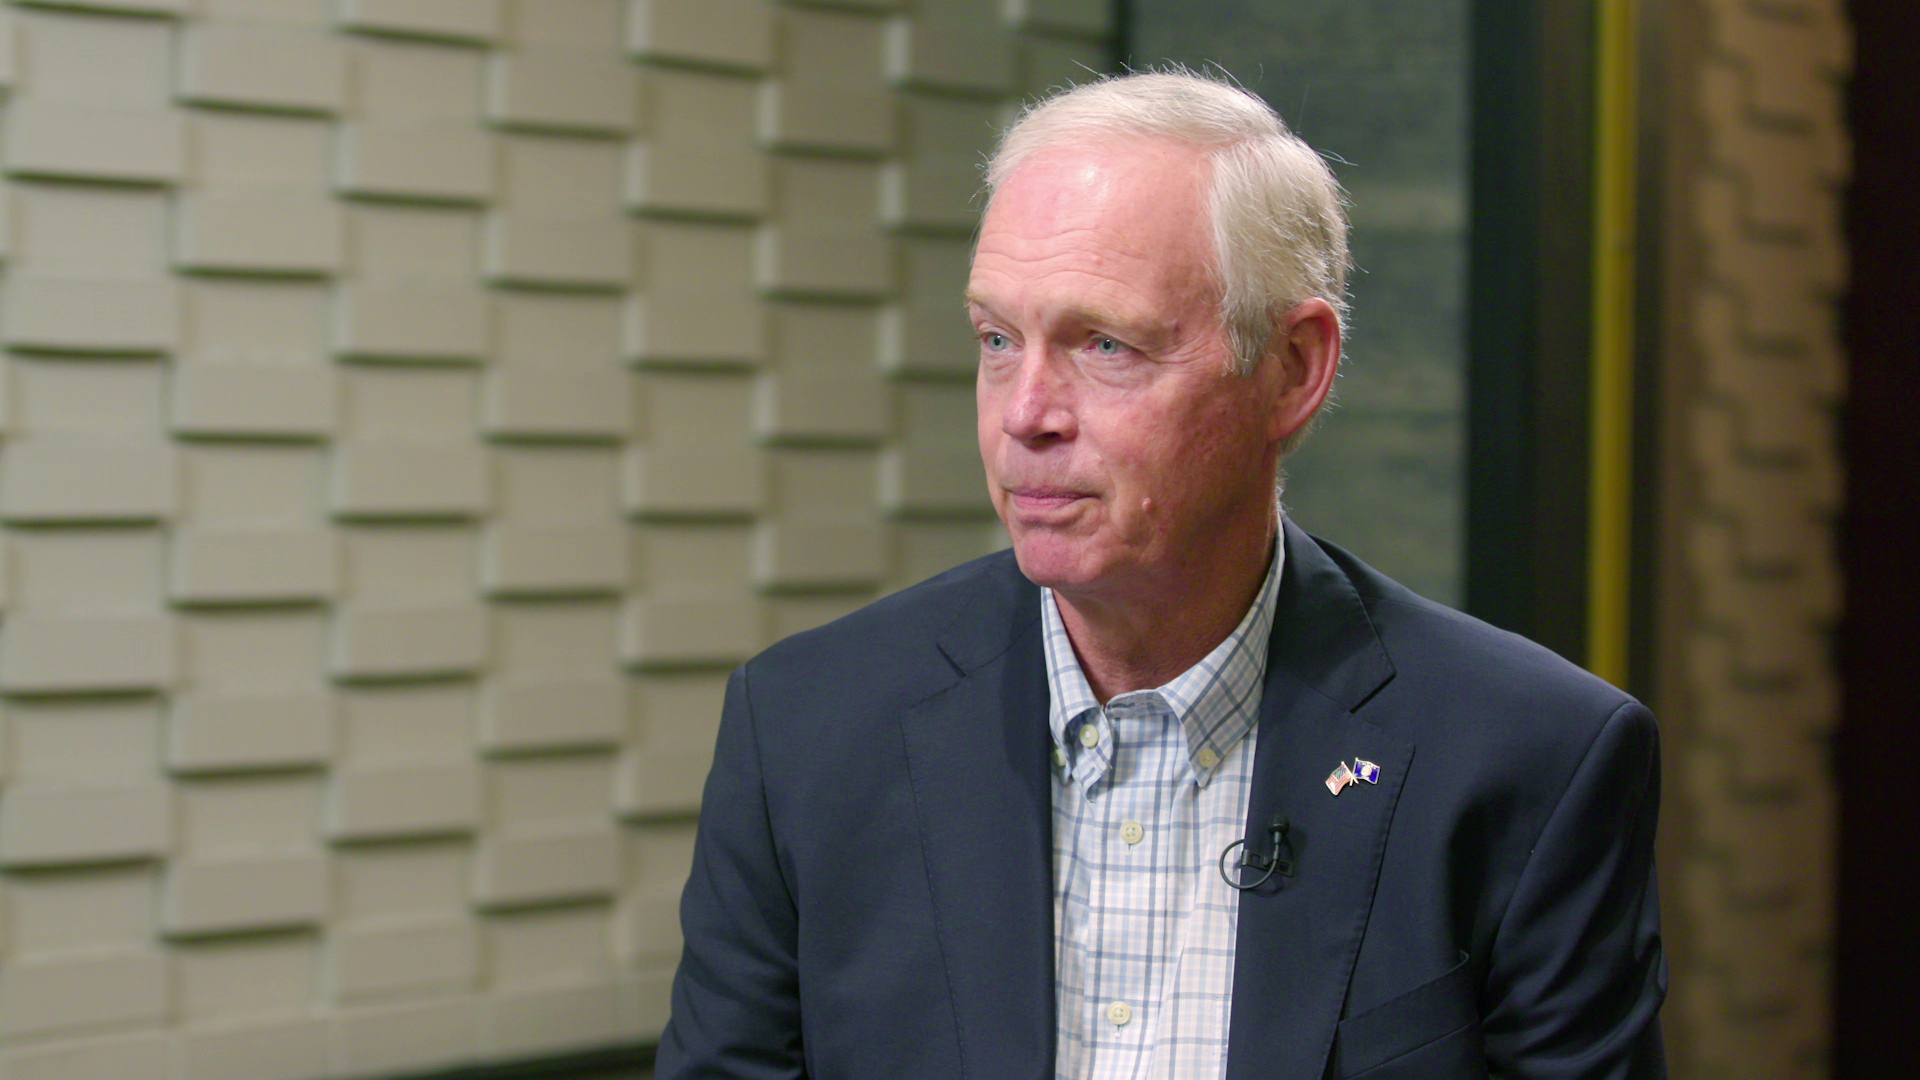 Ron Johnson speaks while looking to his side during an interview, with soundproofing materials on a wall in the background.